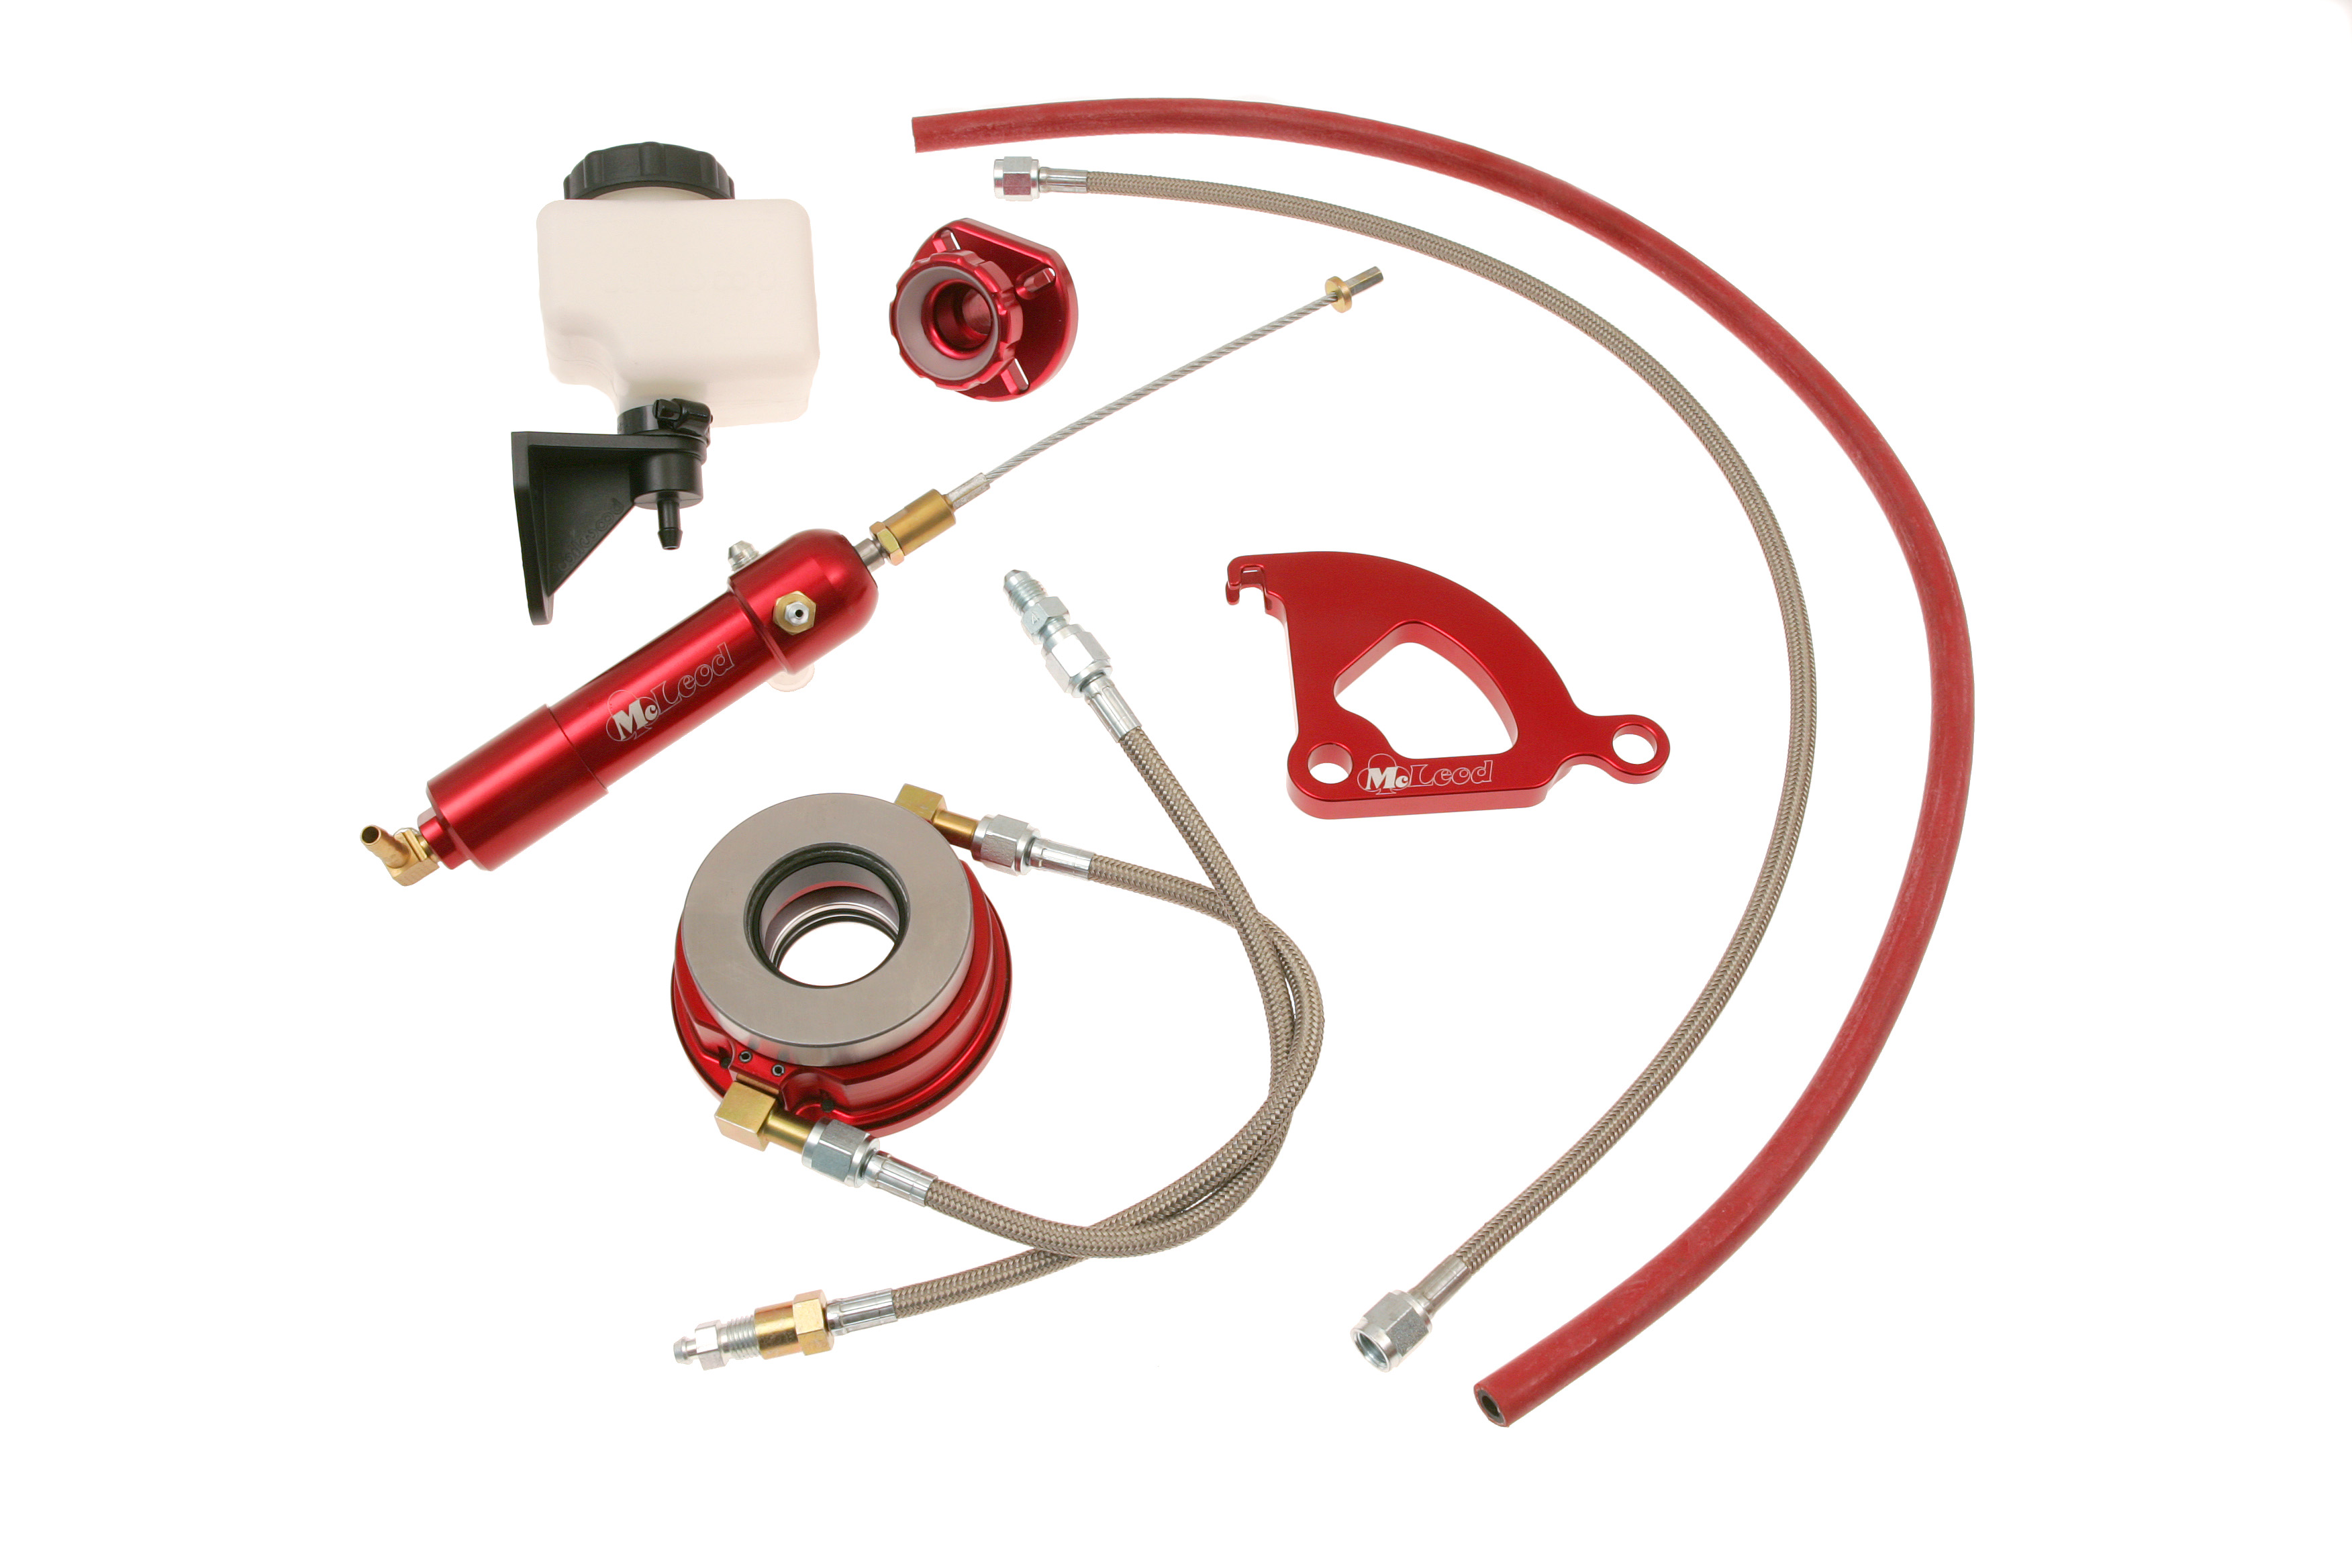 McLeod 14-330-01 Hydraulic Kit Cable for 1979-2004 Mustang - Click Image to Close